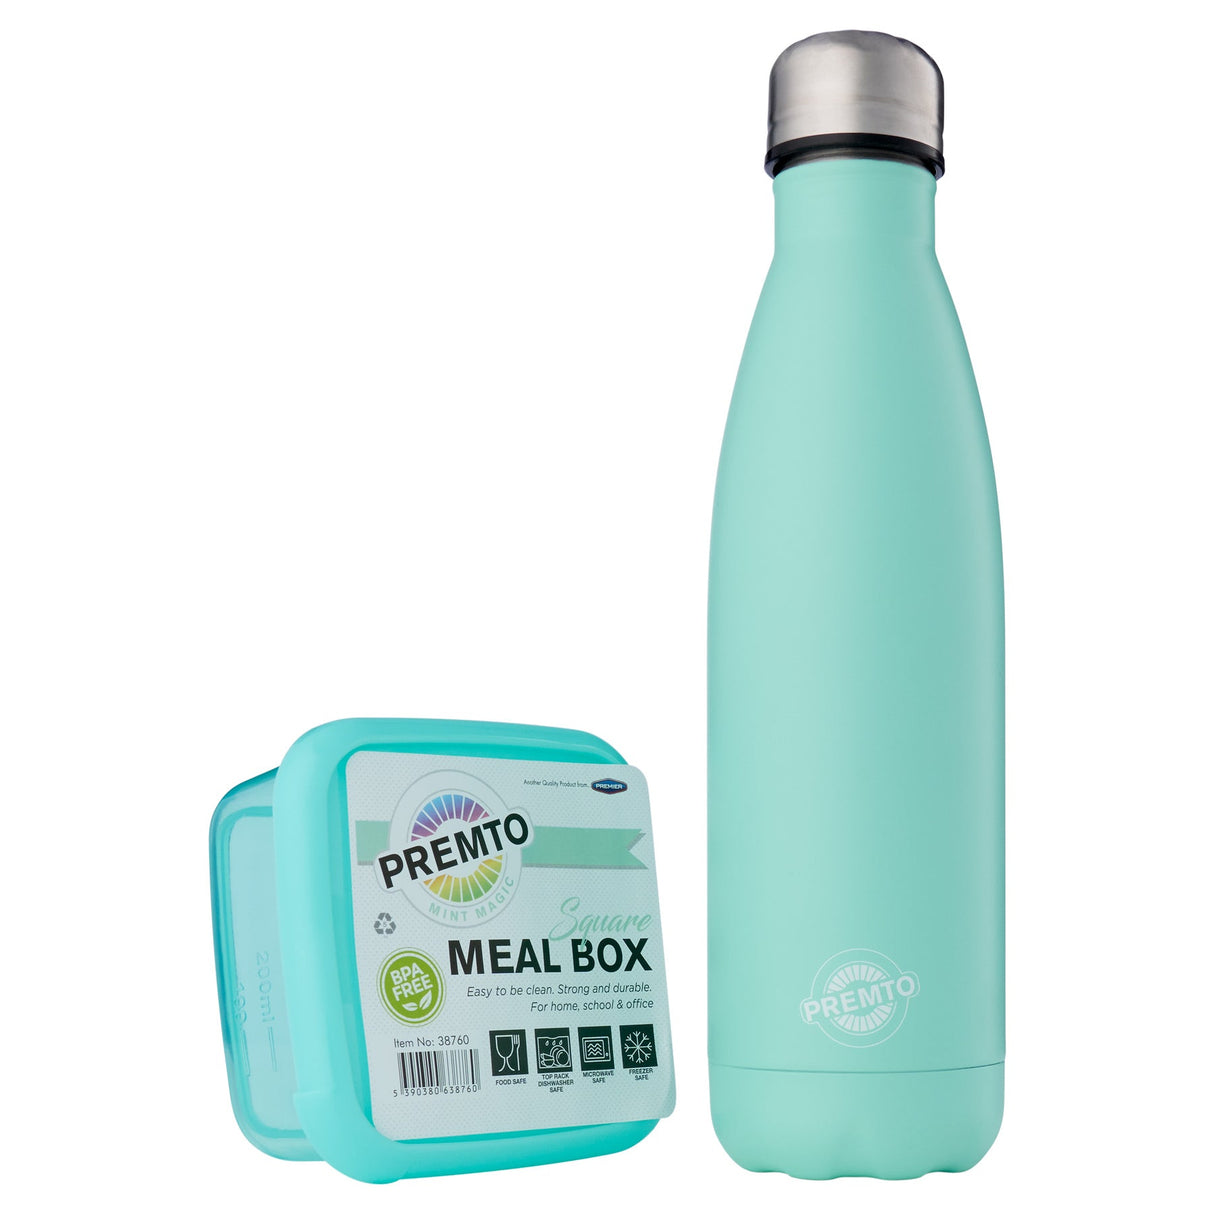 Premto Snack Box & Stainless Steel Bottle - Pastel - Mint Magic Green | Stationery Shop UK